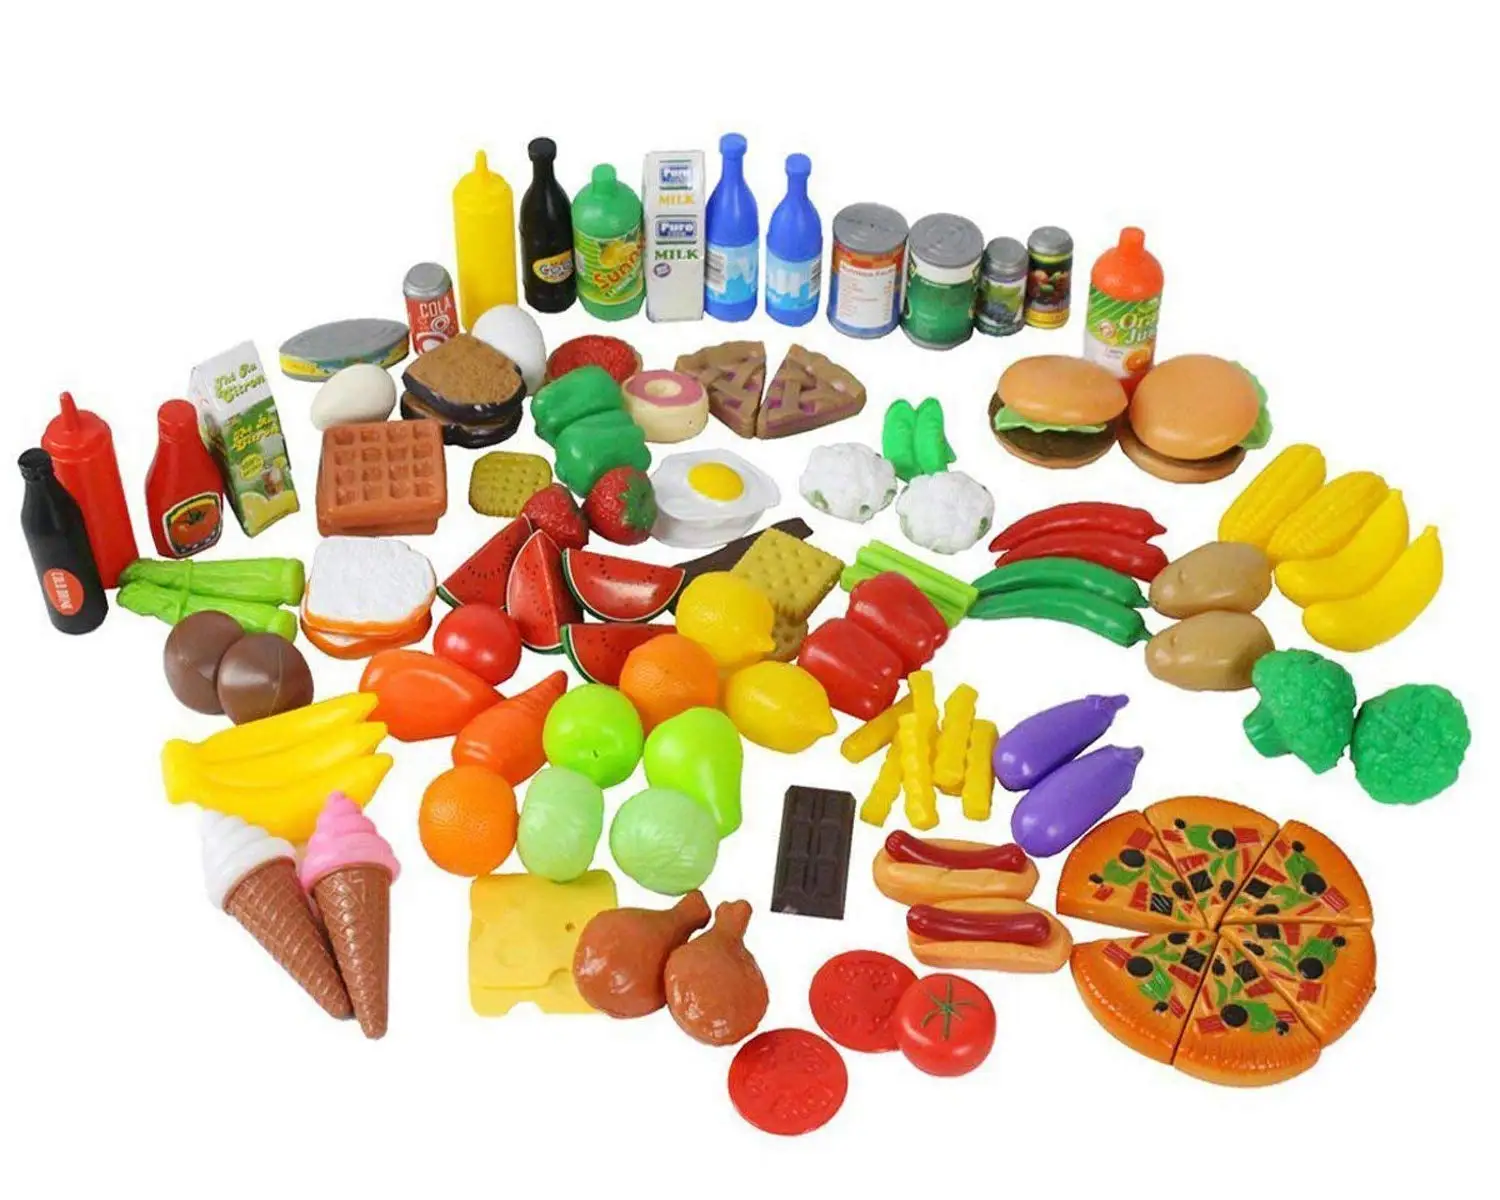 children's play food and dishes